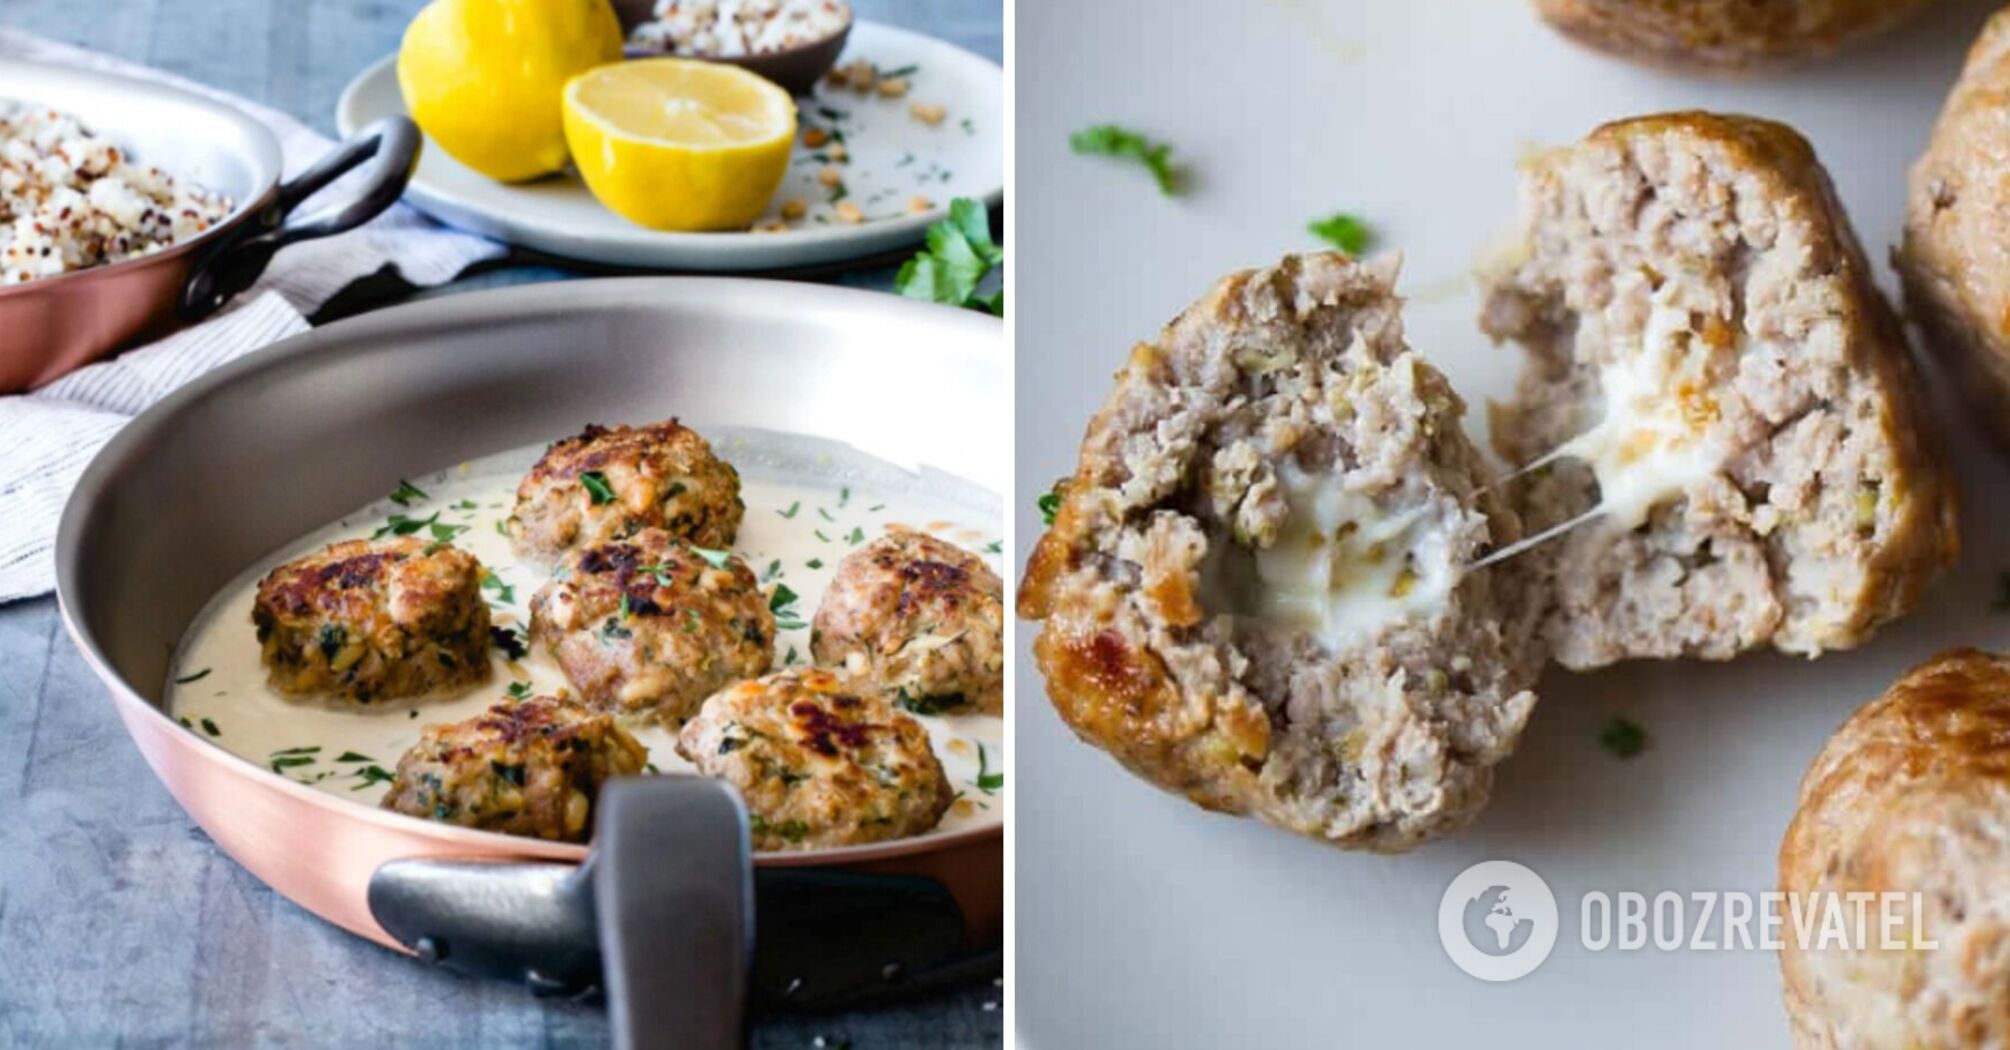 Recipes for healthy meatballs for a quick dinner: top 2